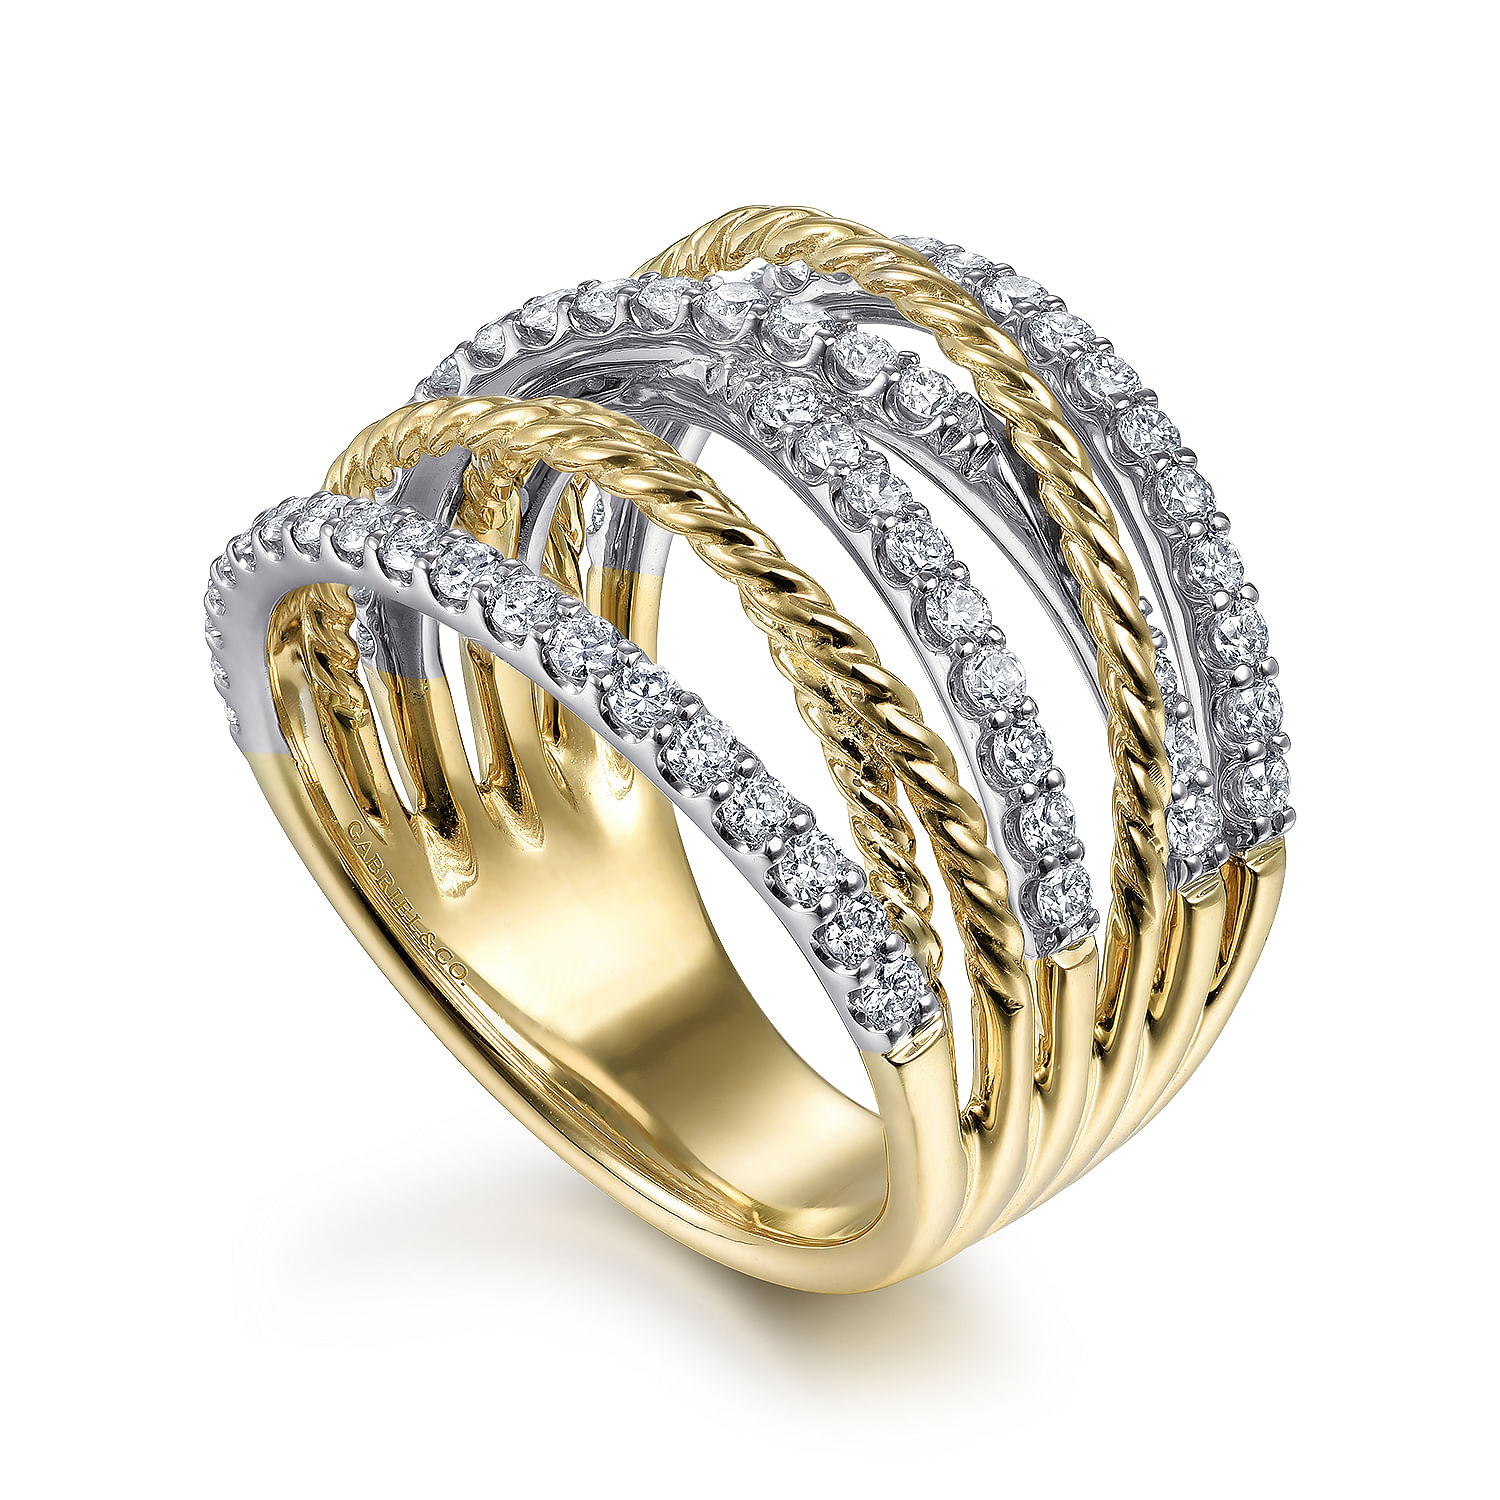 14K White-Yellow Gold Twisted Rope and Diamond Multi Row Ring